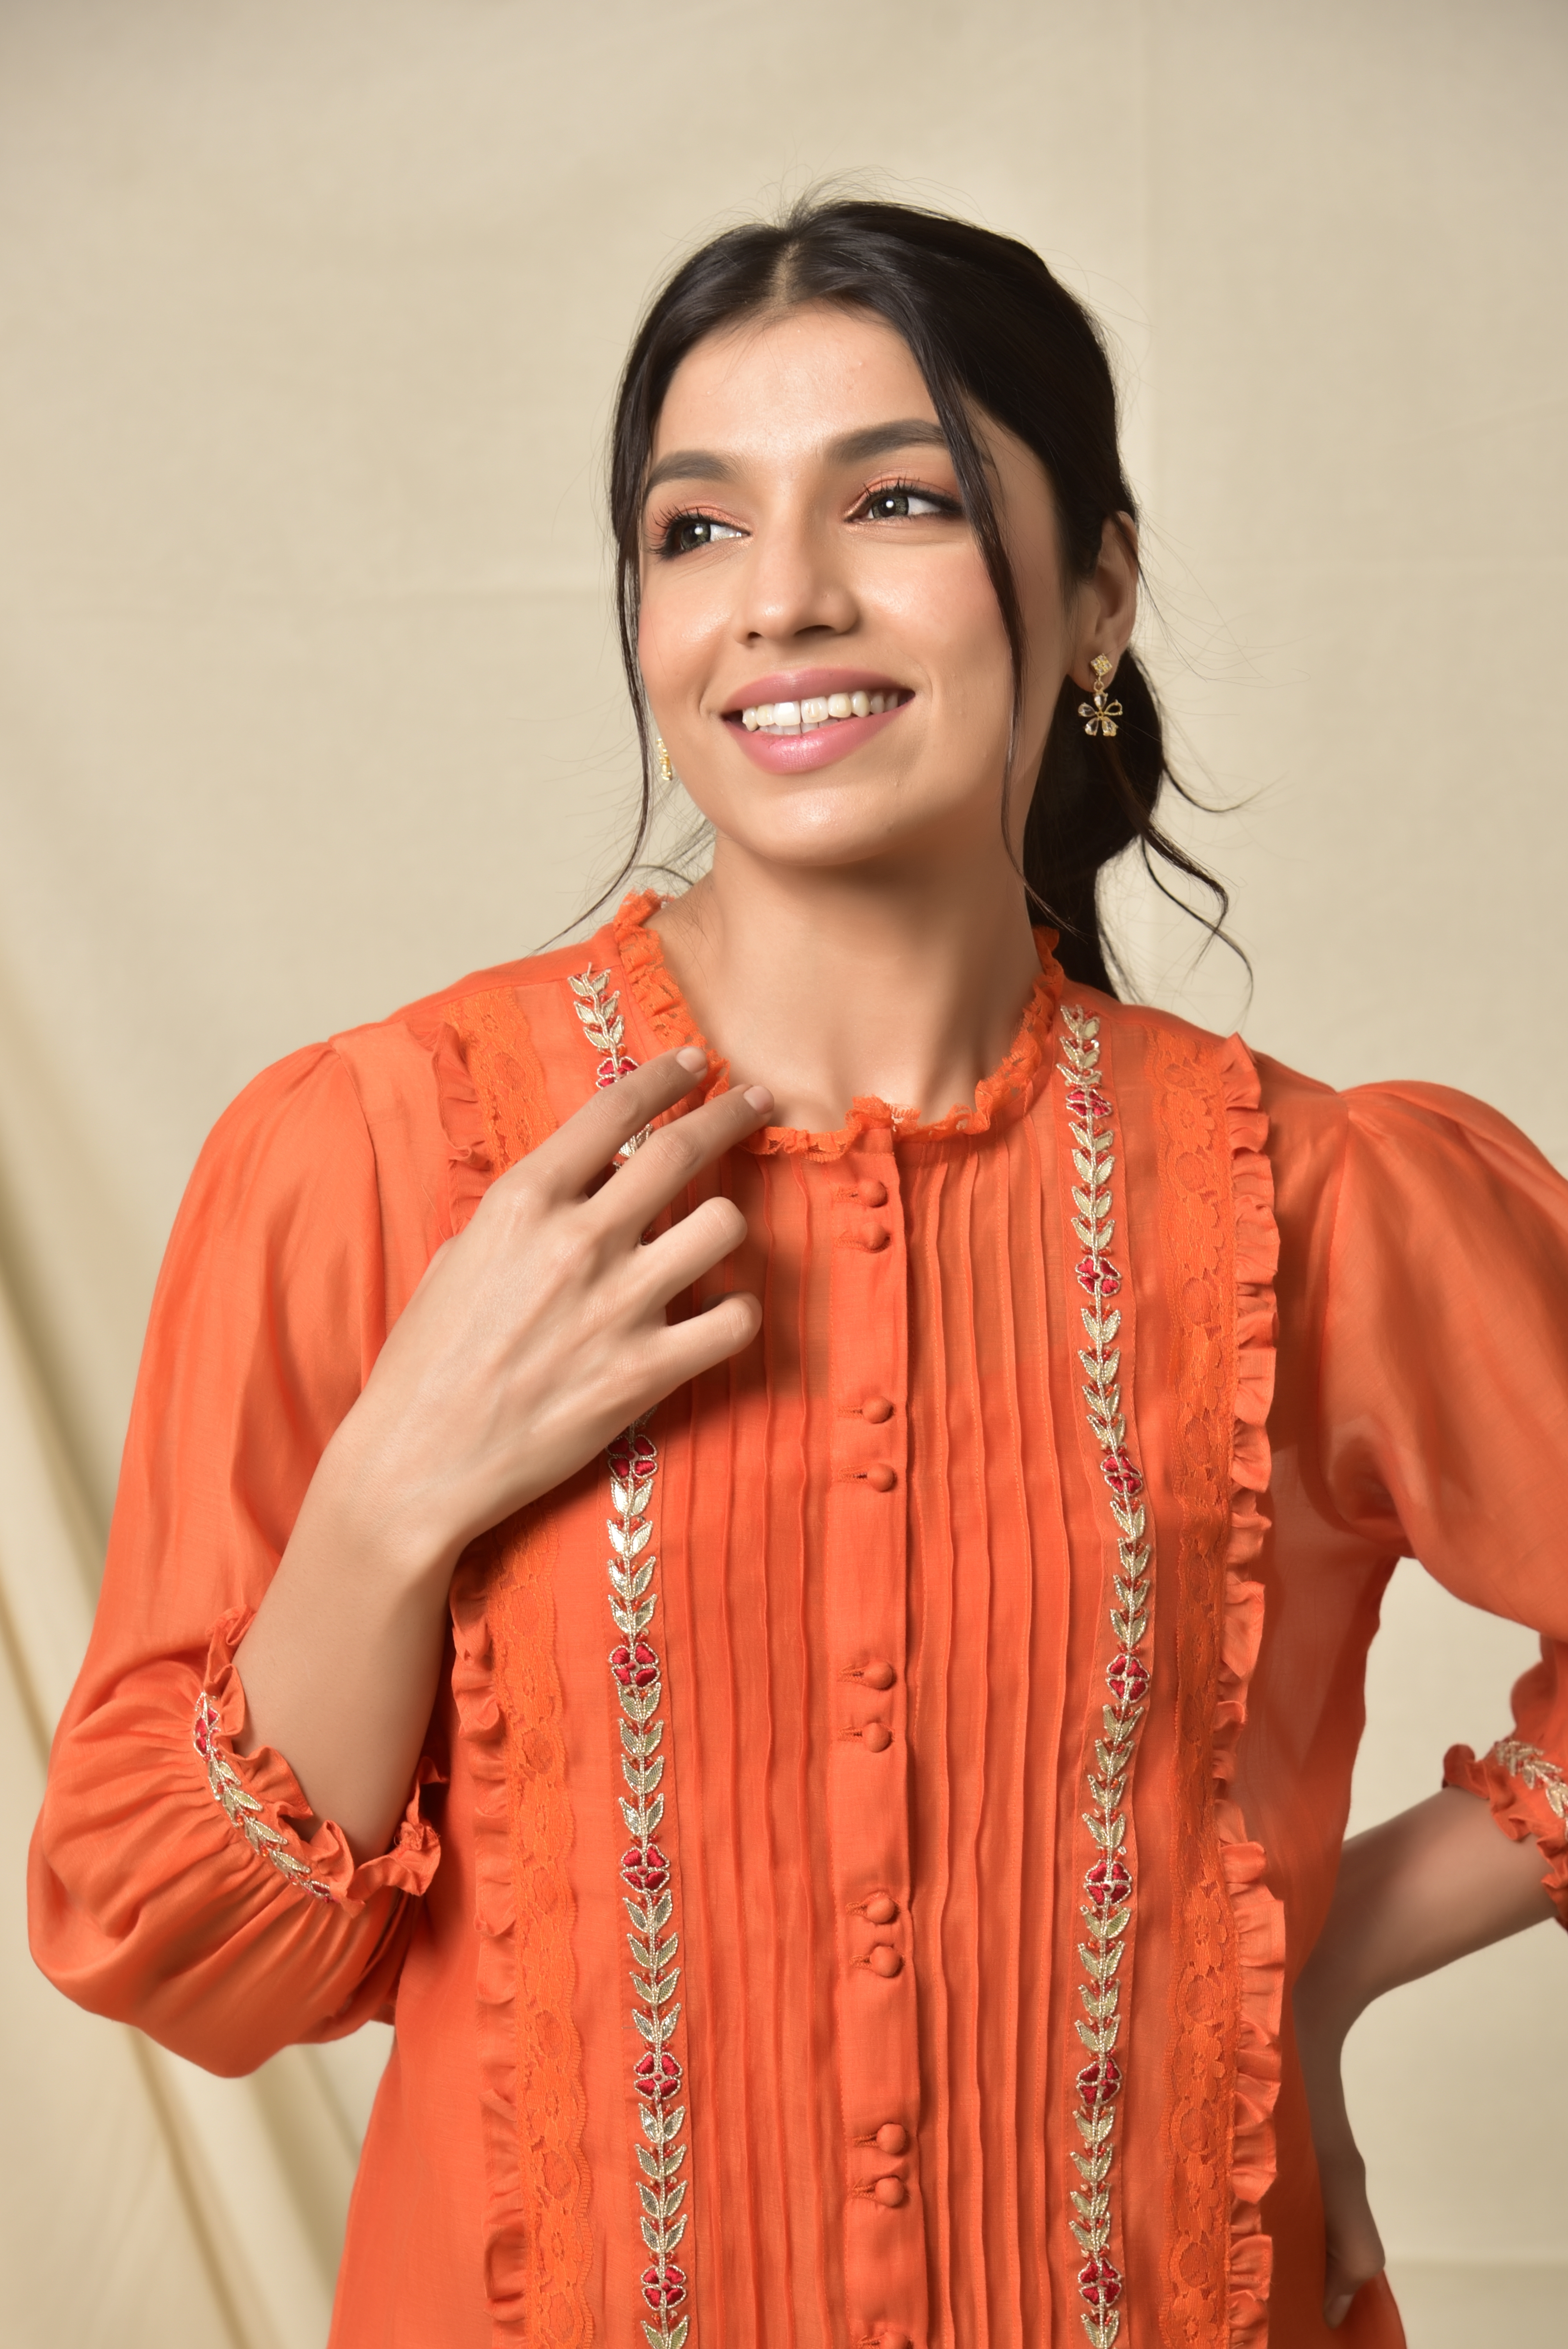 Orange Chanderi Lace Top With Gota Border on Both Side